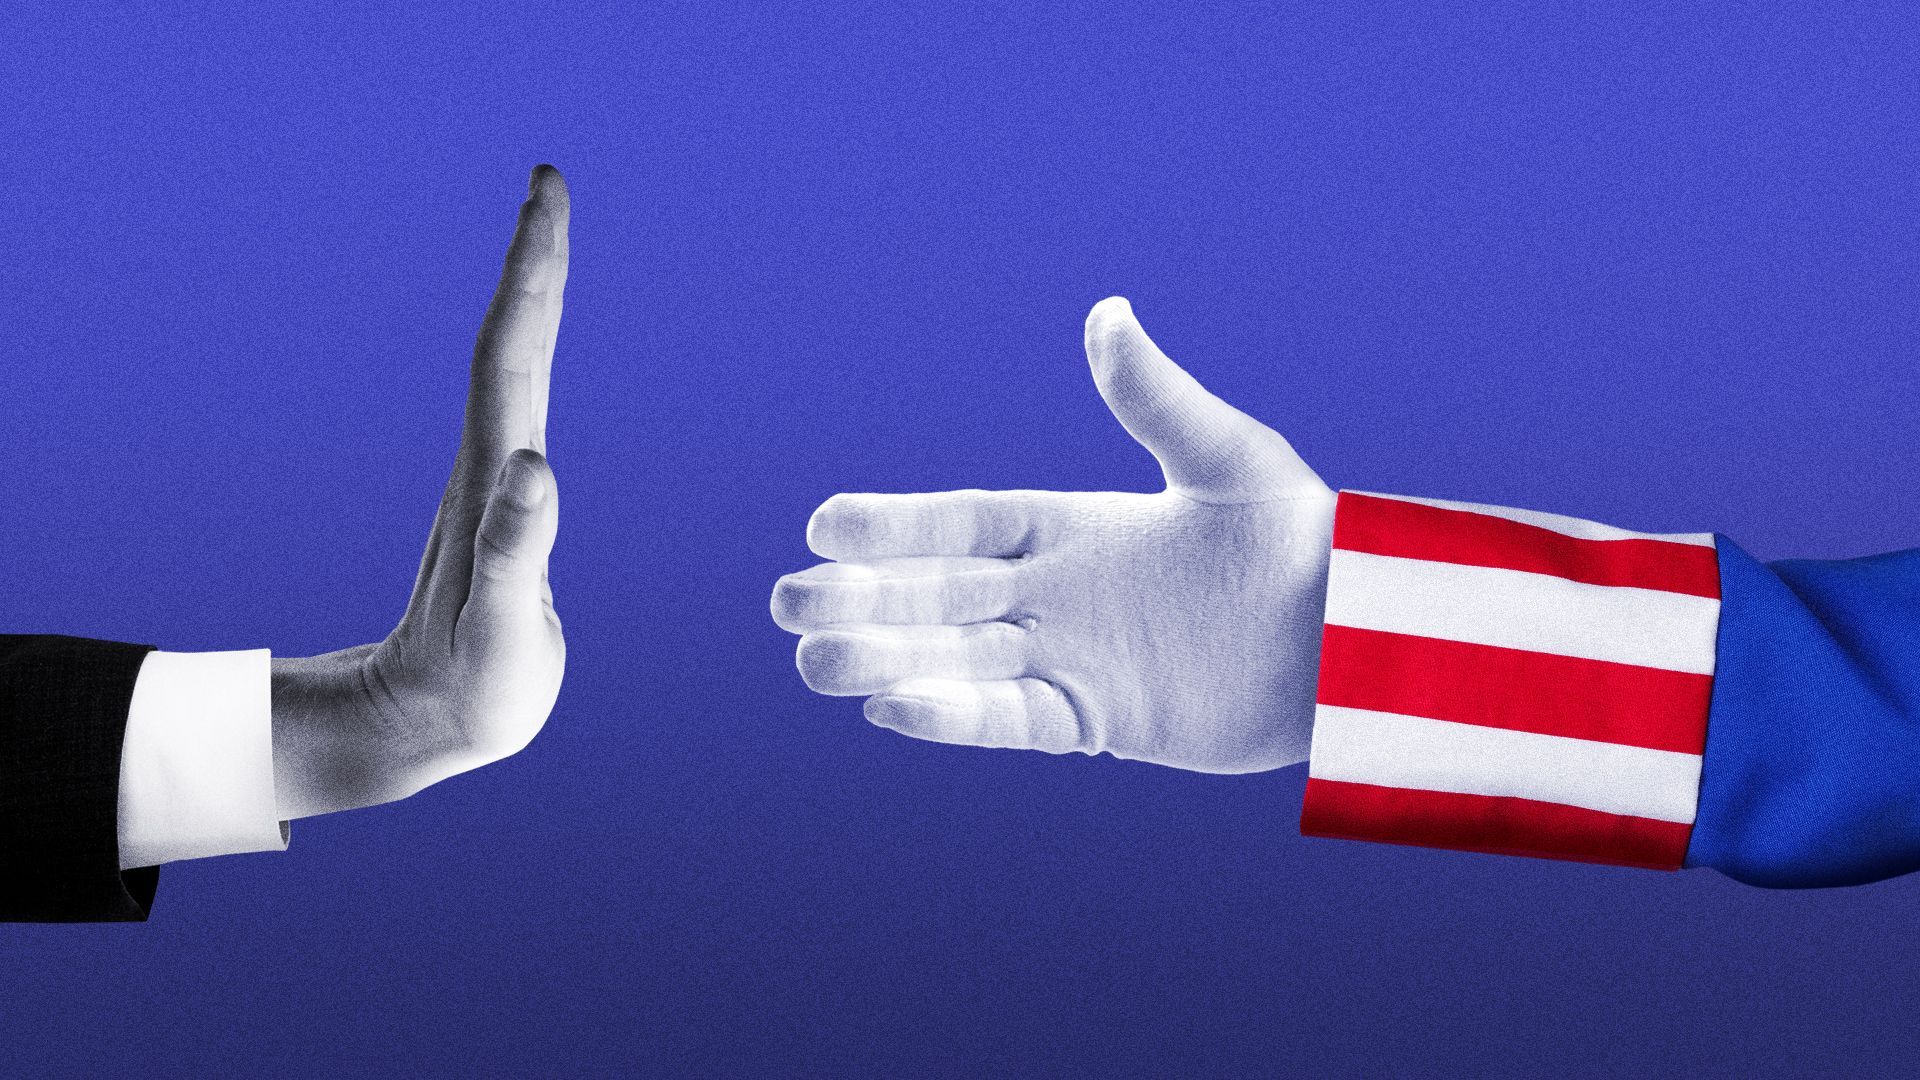 Illustration of a hand refusing to shake Uncle Sam's outstretched hand.